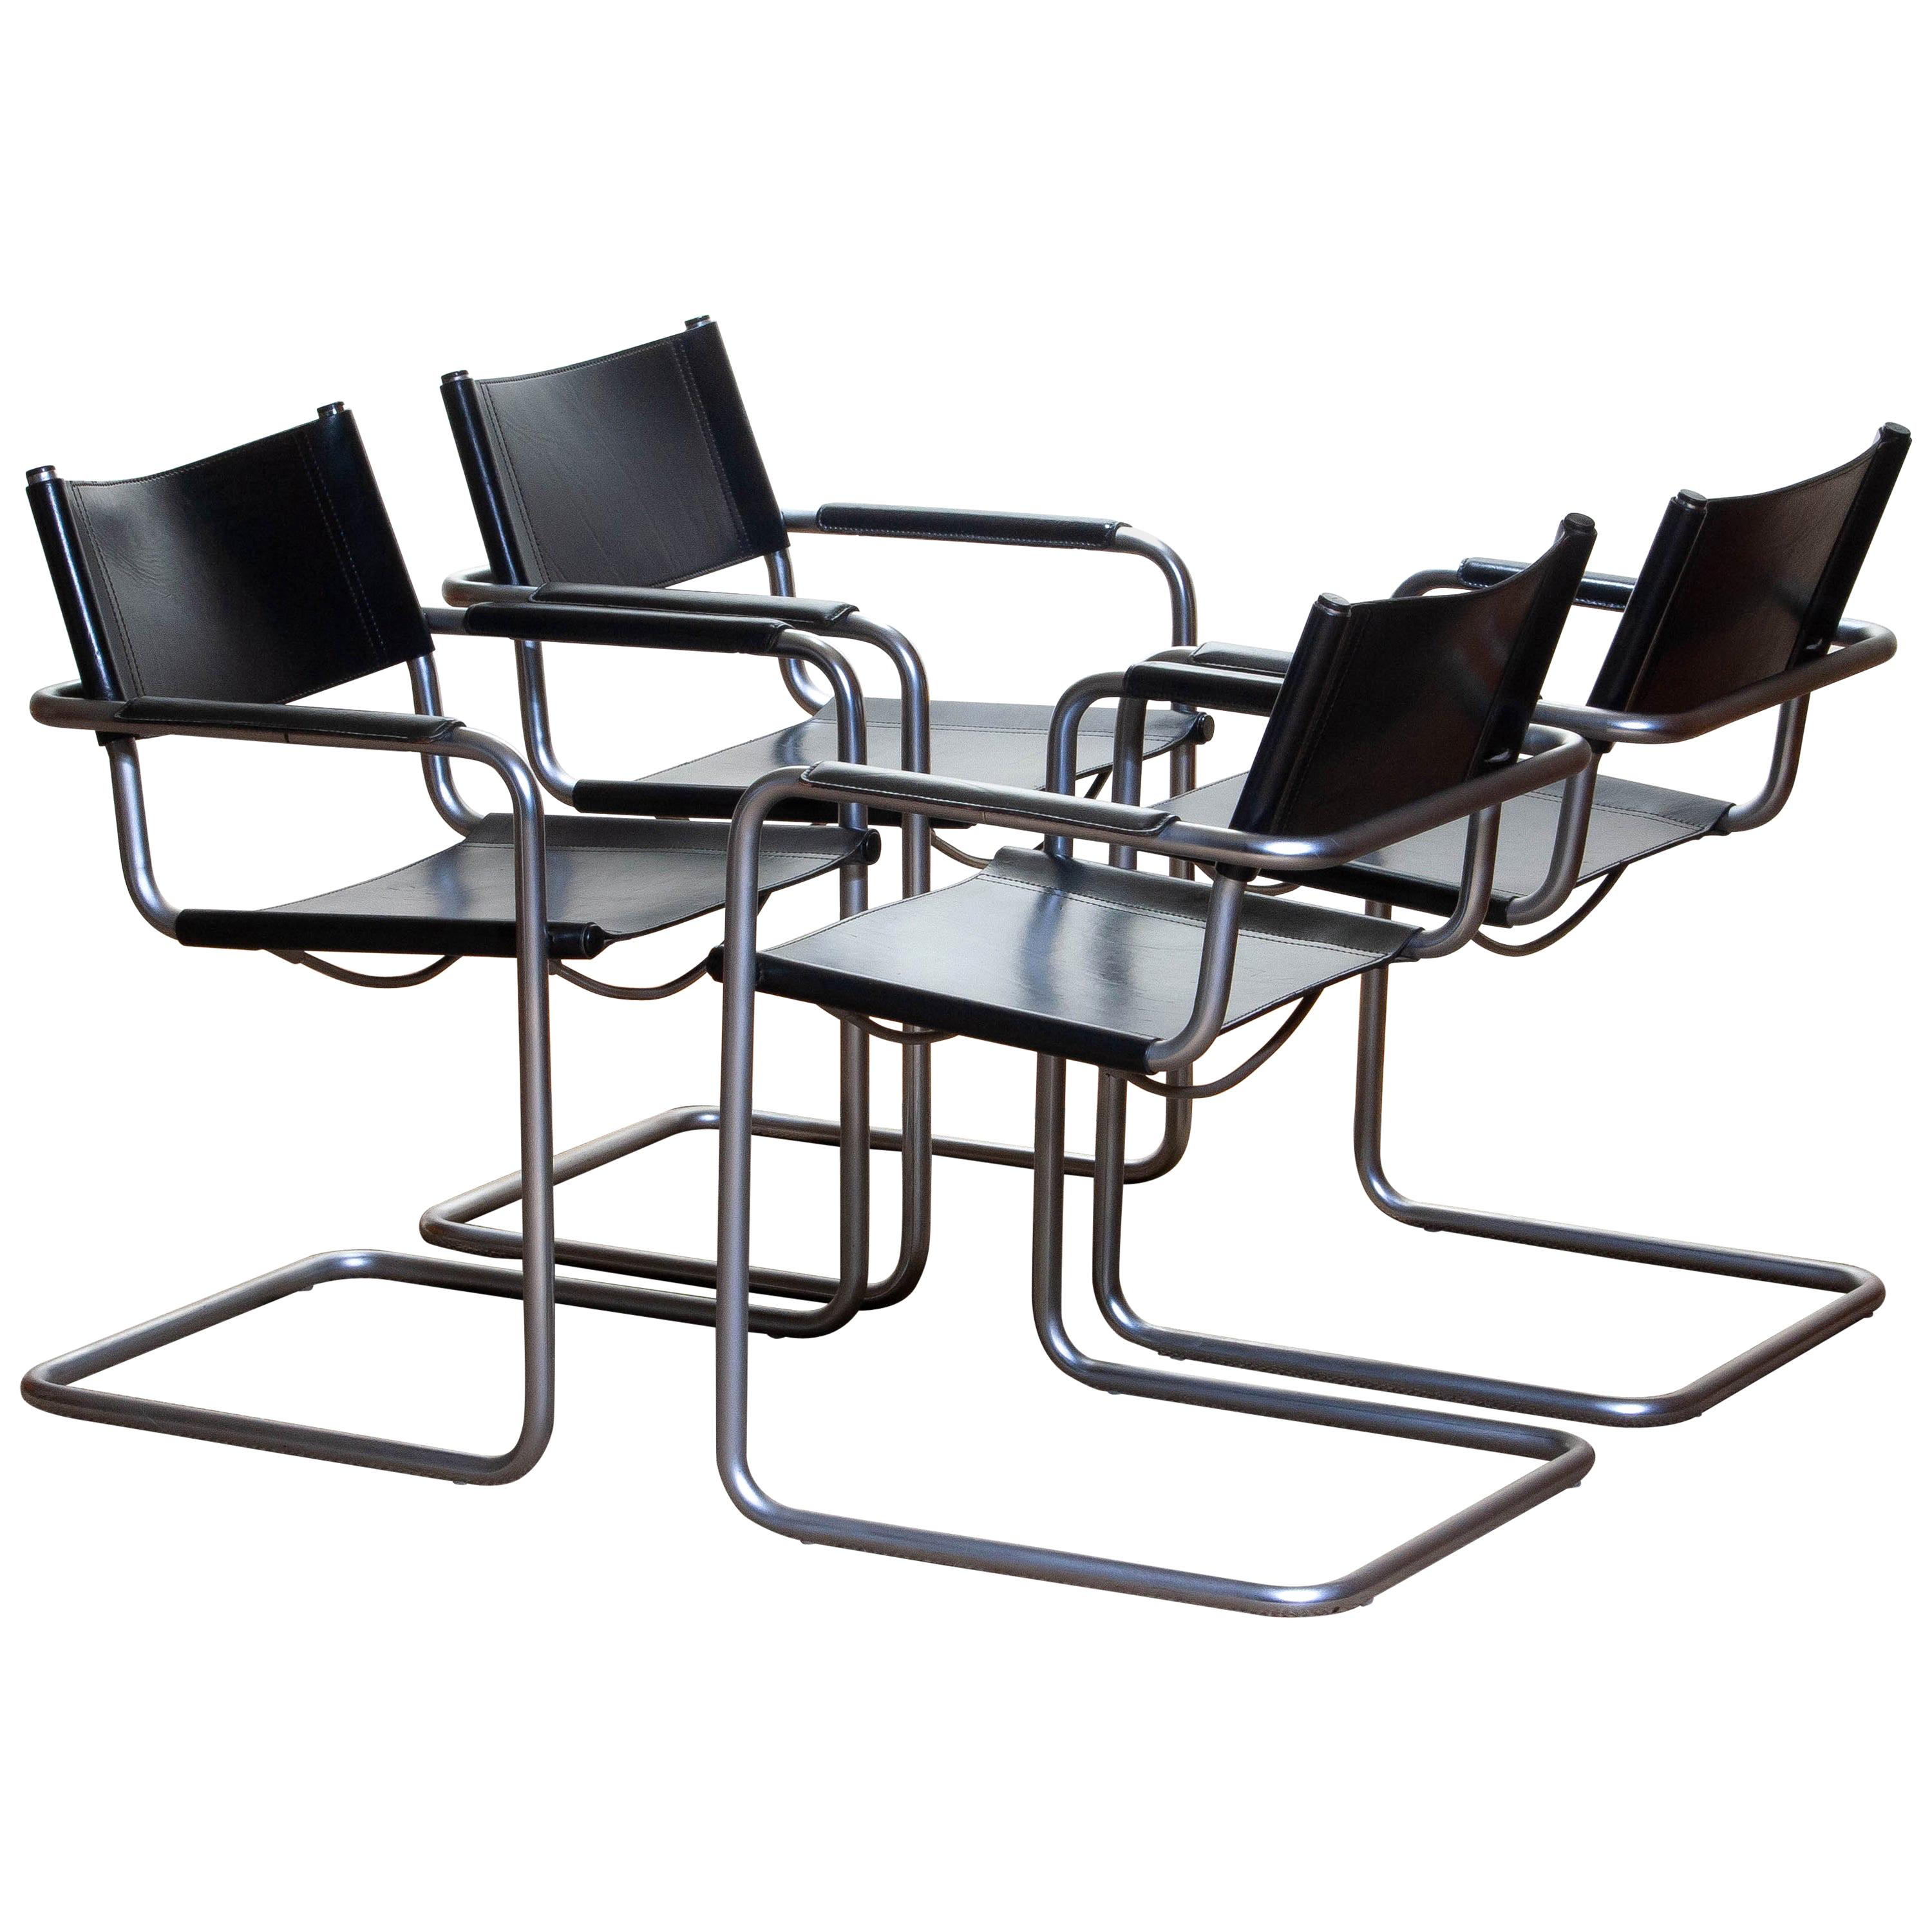 Italian 1970s, Set of Four MG5 Black Leather Dining or Office Chairs by Matteo Grassi